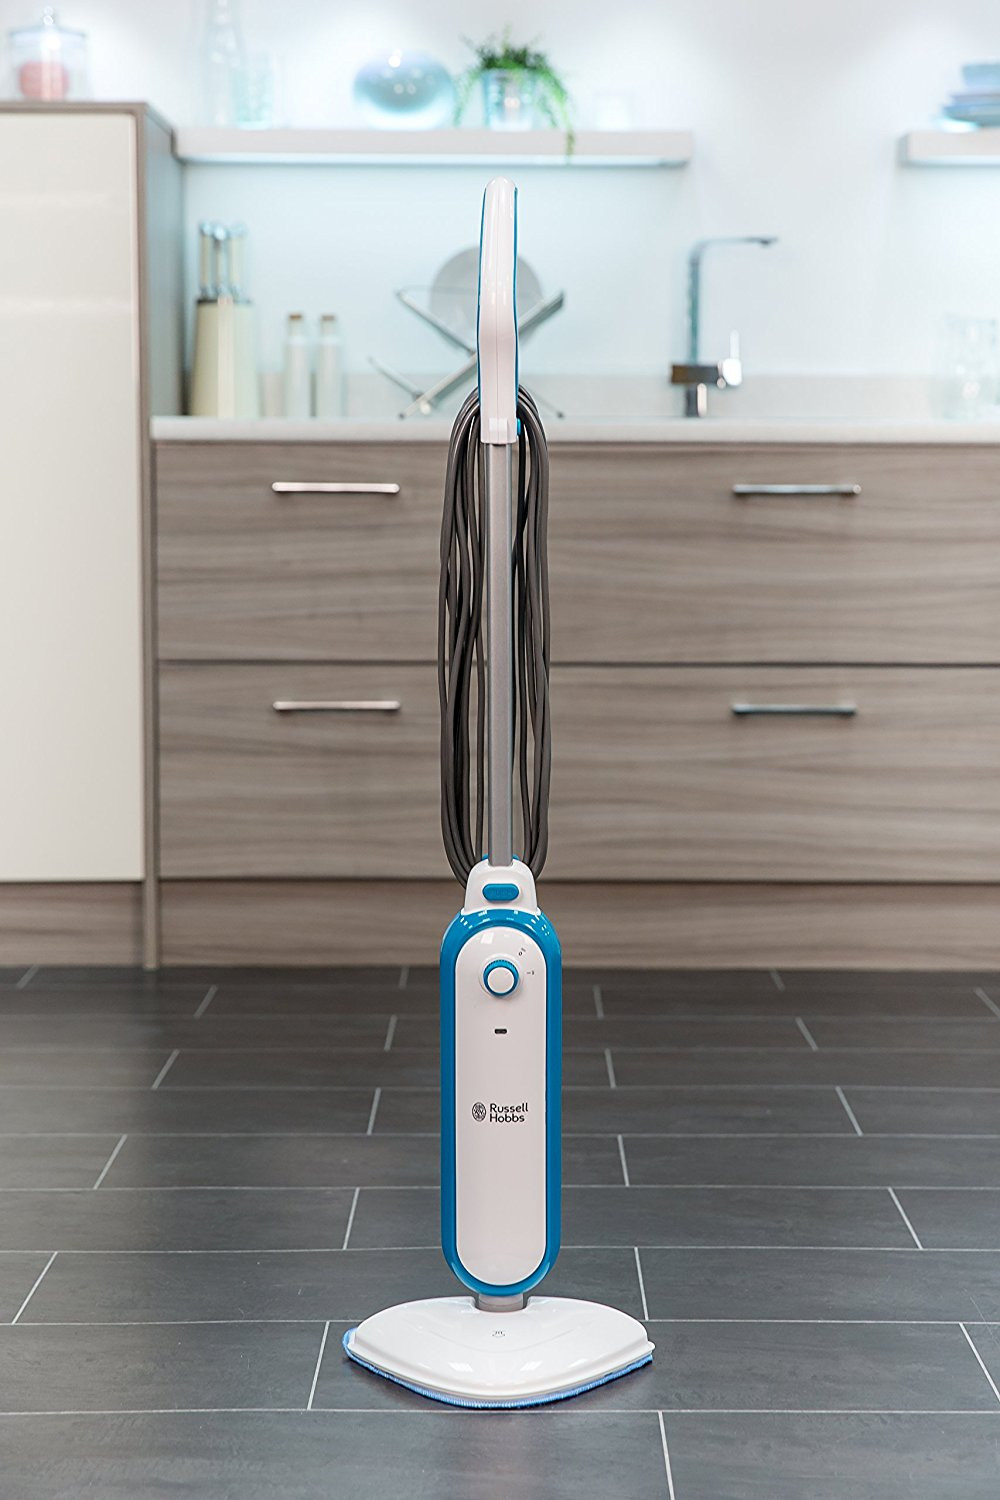 13 Lovely Hardwood Floor Steam Cleaner Reviews 2024 free download hardwood floor steam cleaner reviews of russell hobbs rhsm1001 steam and clean steam mop white aqua free with regard to russell hobbs rhsm1001 steam and clean steam mop white aqua free 2 yea